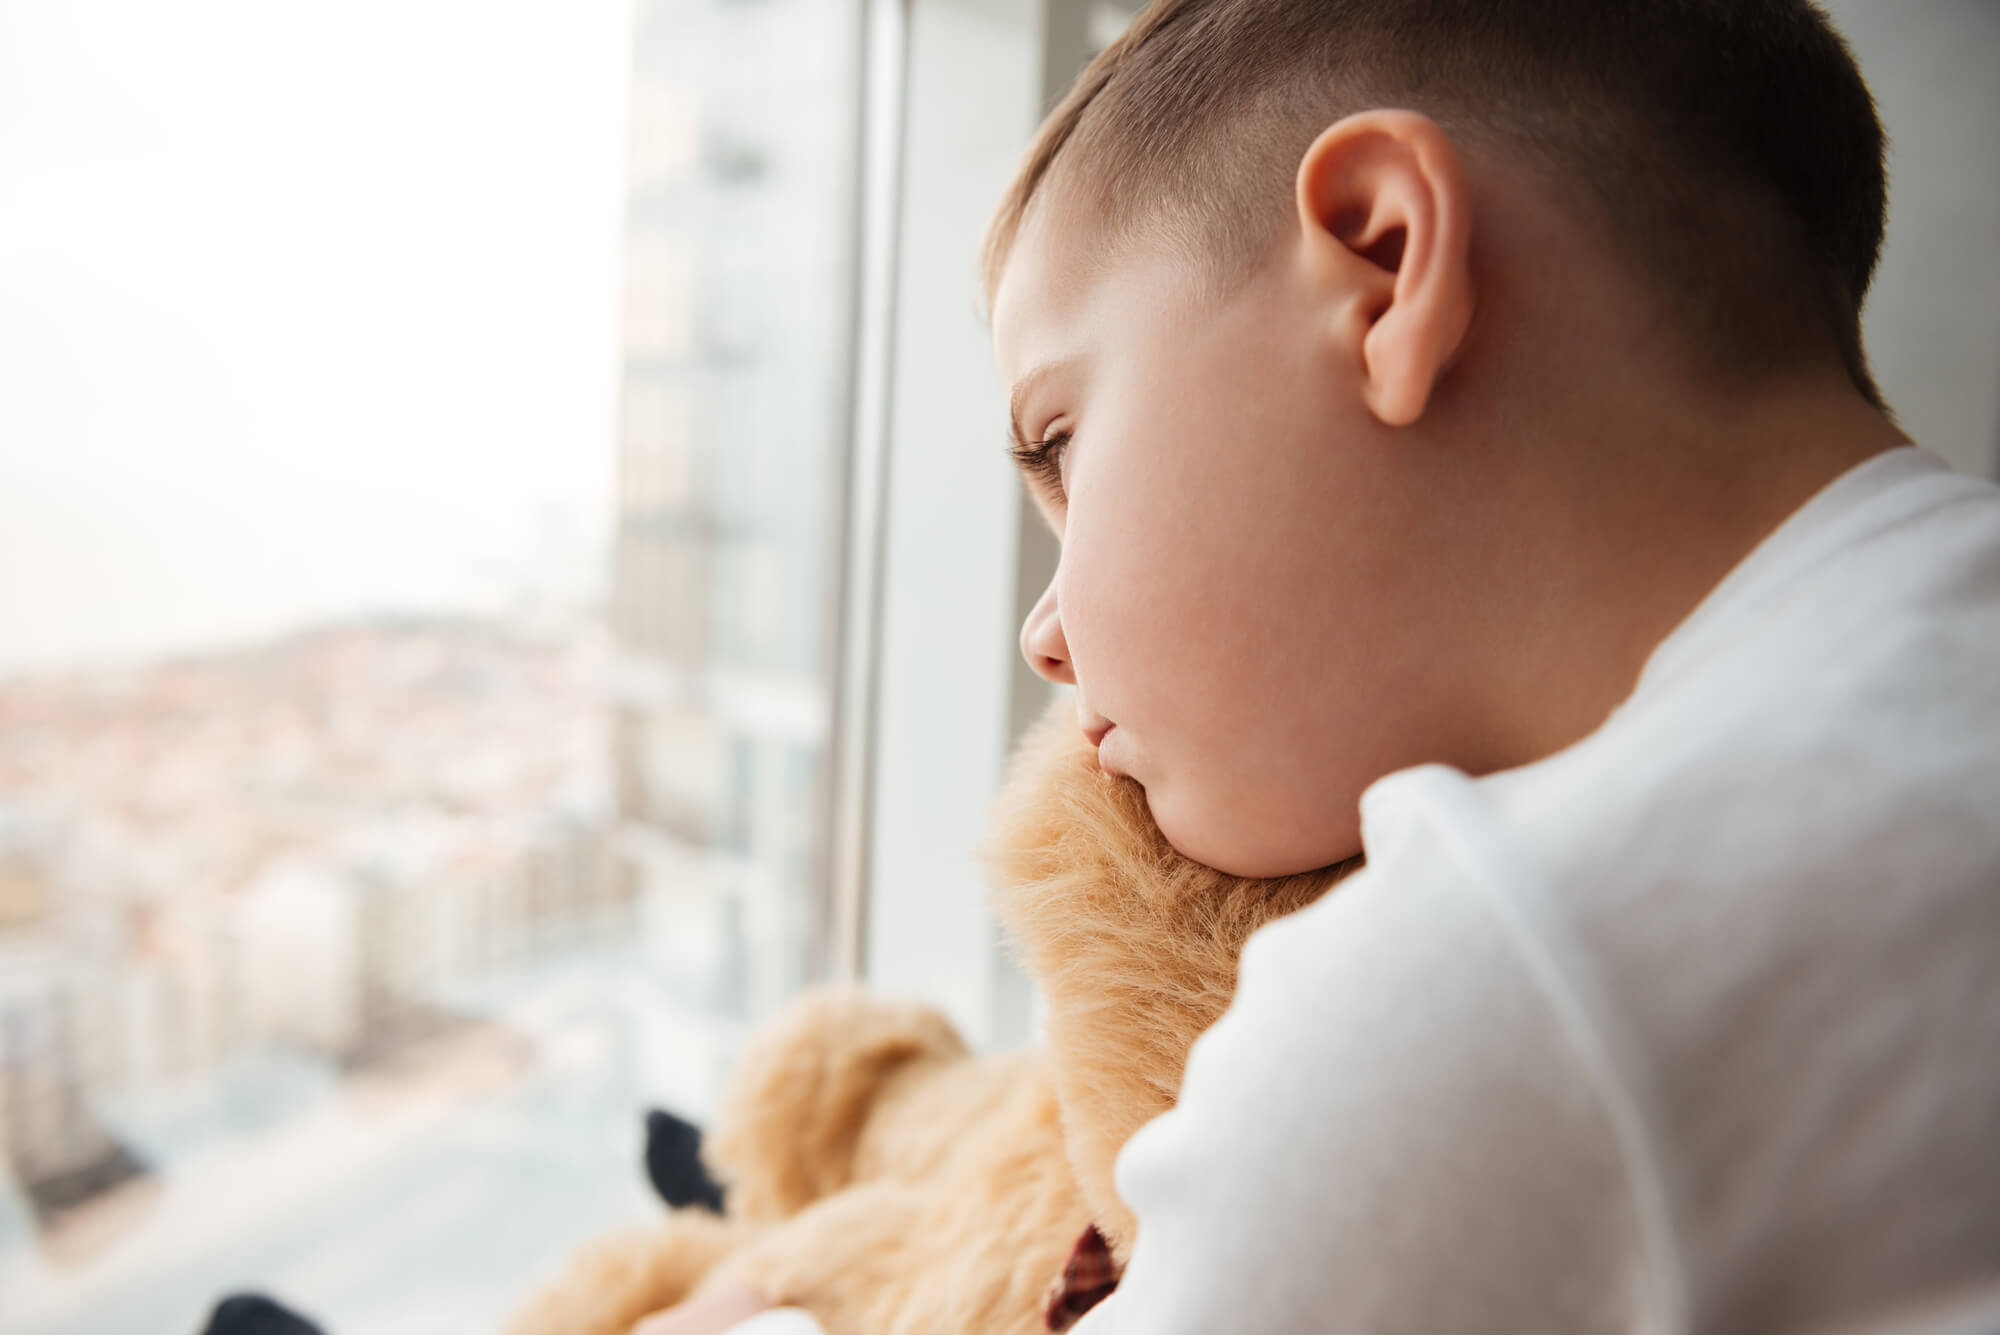 Foster care’s a ticking time bomb - here’s 5 solutions